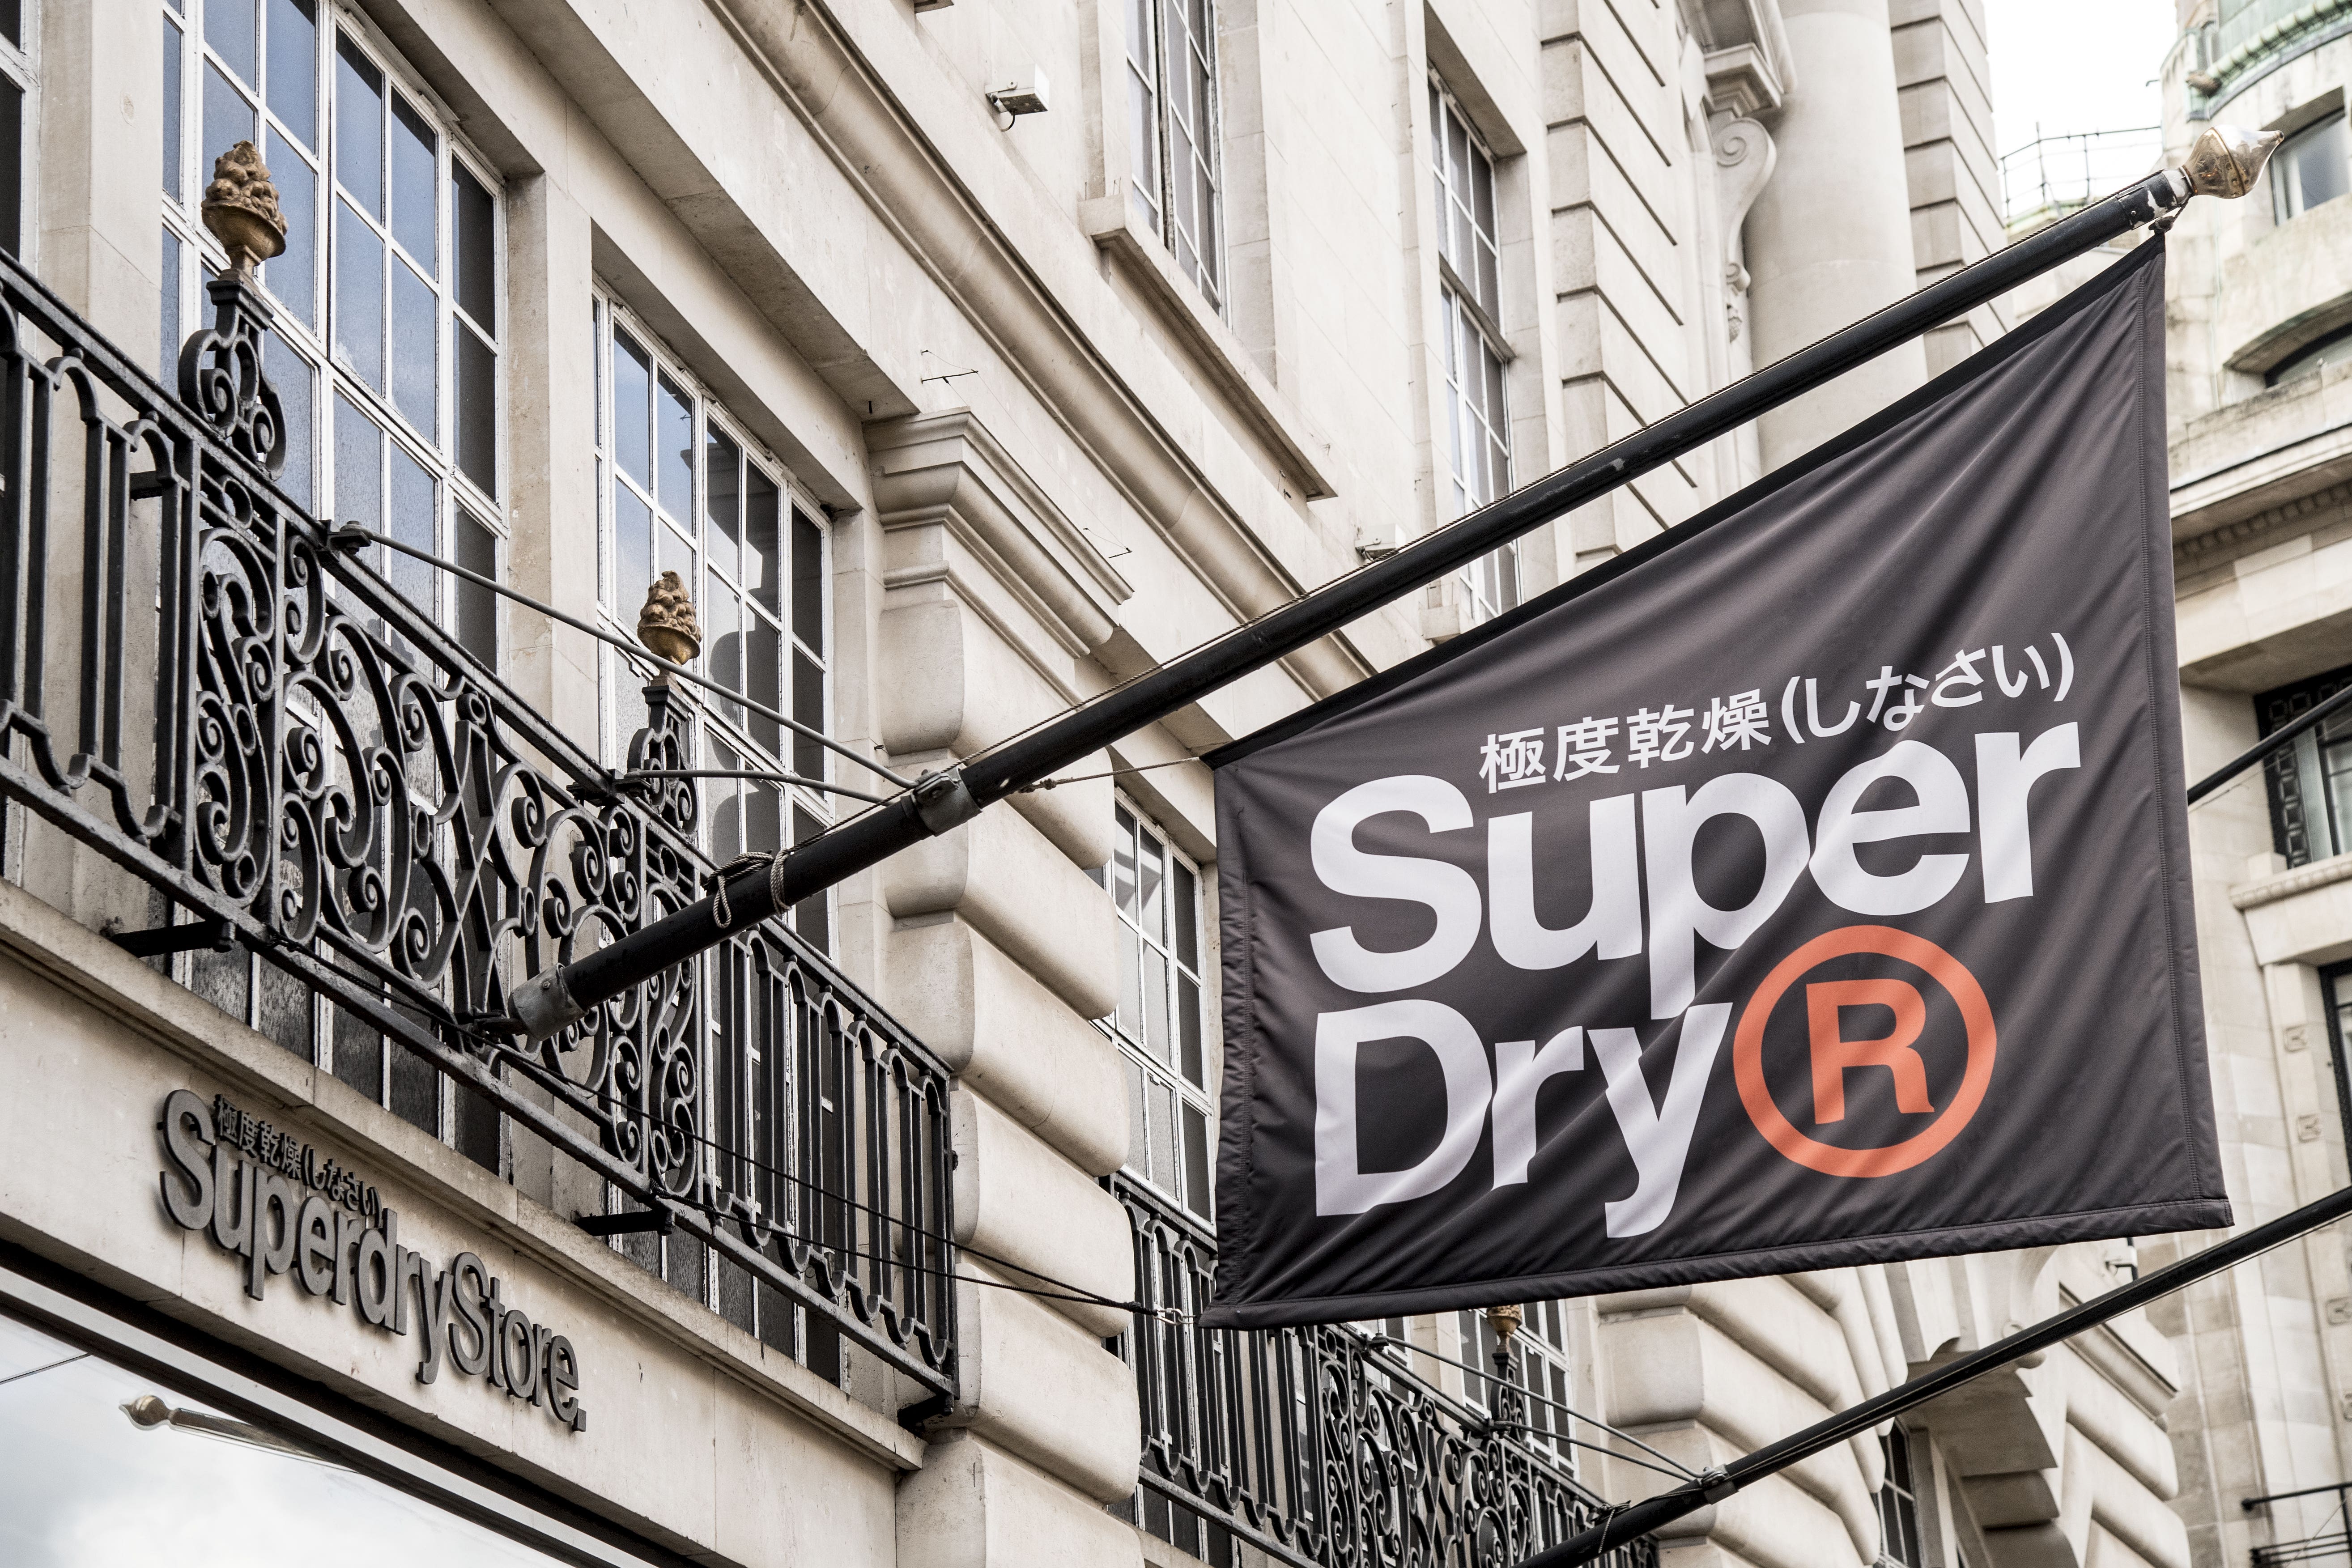 SuperDry has said it is assessing “cost saving options” with advisors after reports it could stores and jobs (Ian West/PA)